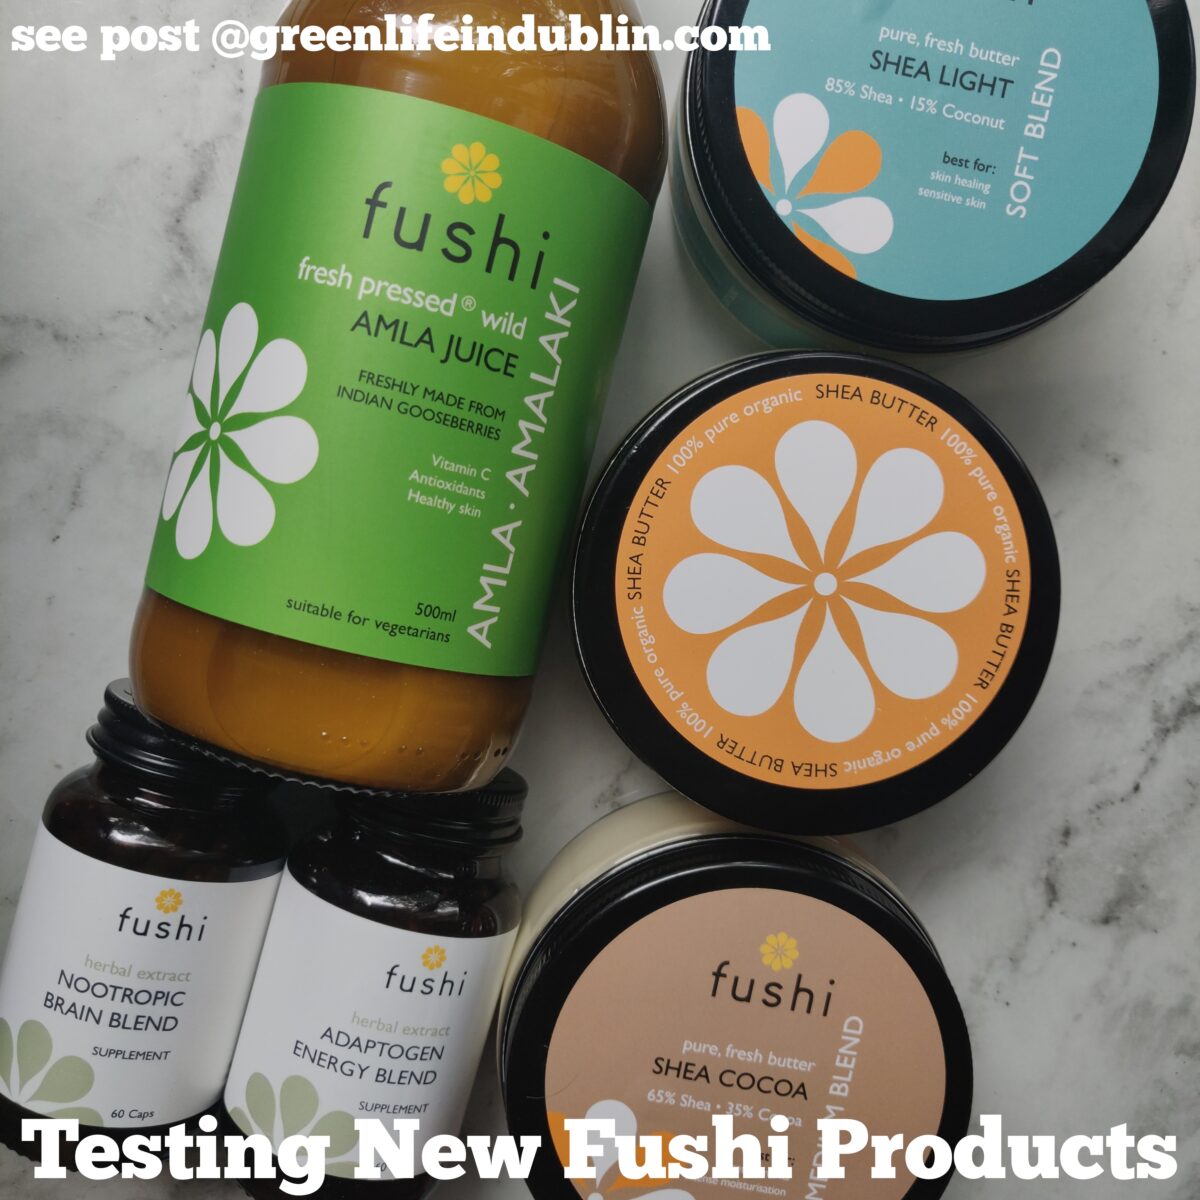 Testing new Fushi products - shea butters, amla juice & supplements